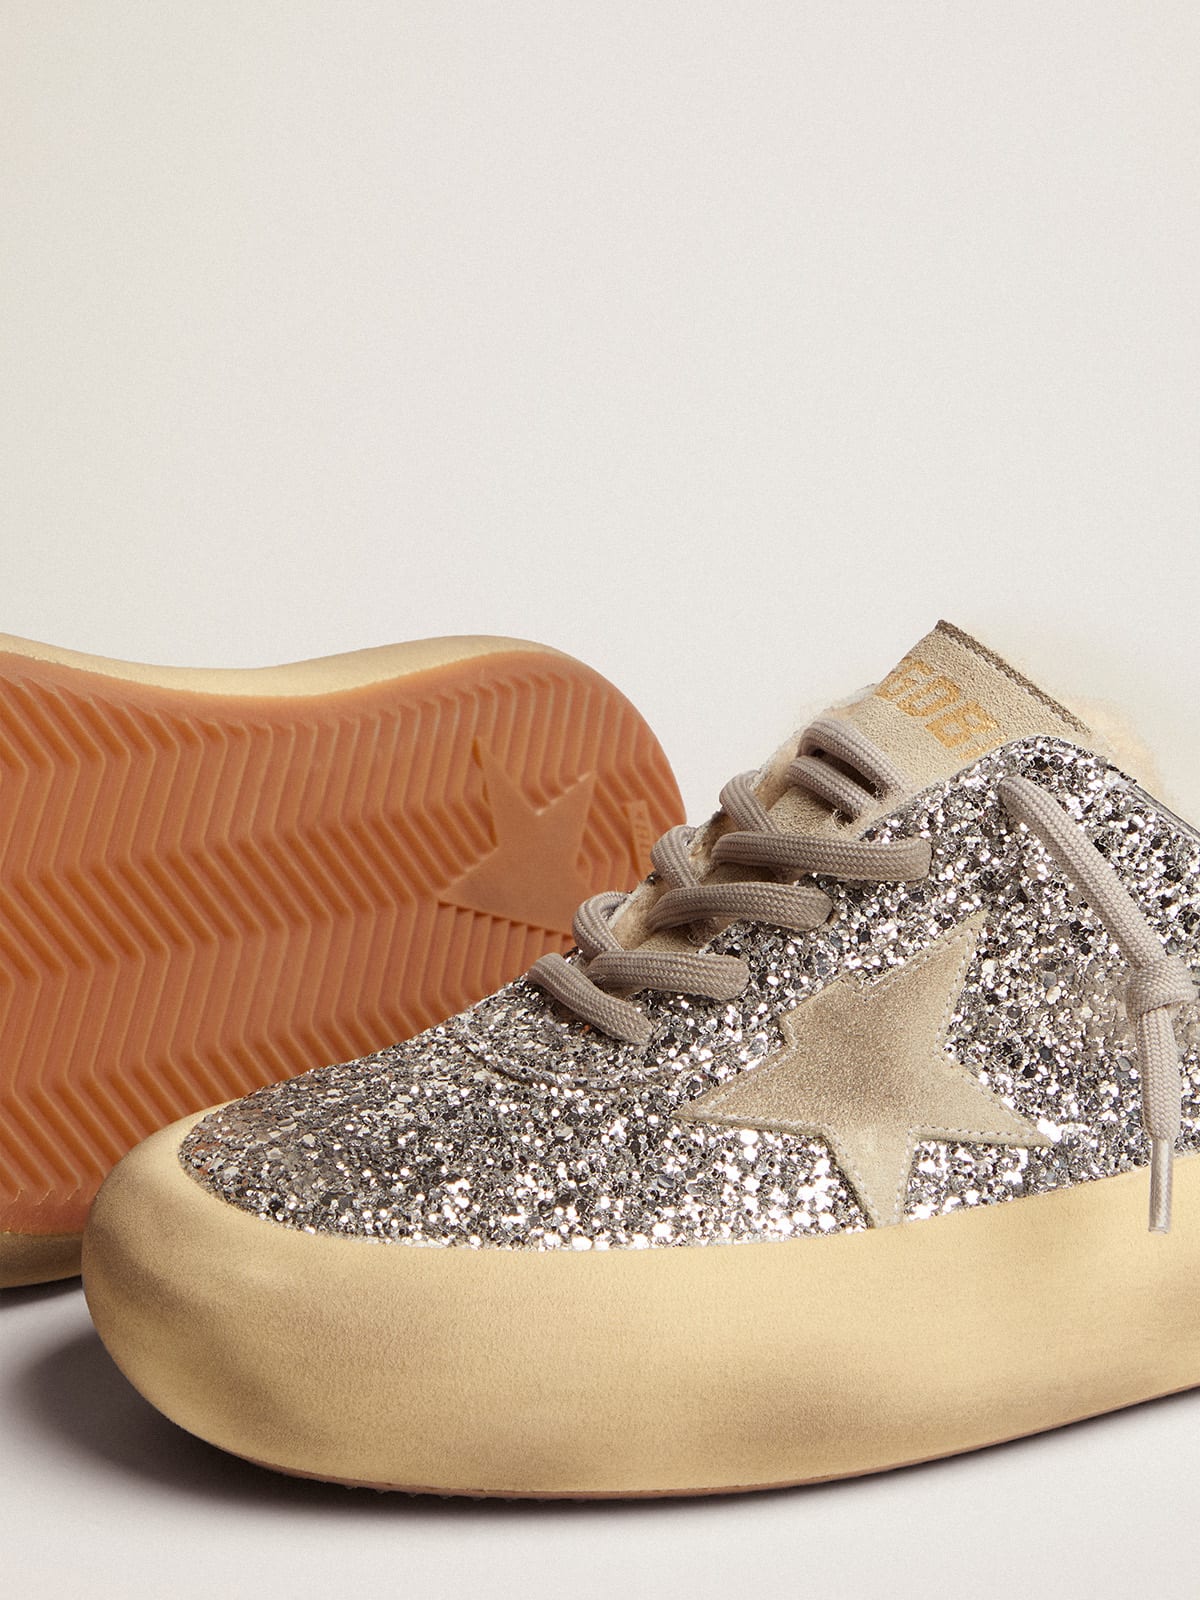 Golden Goose - Space-Star Sabot shoes in silver glitter with shearling lining in 